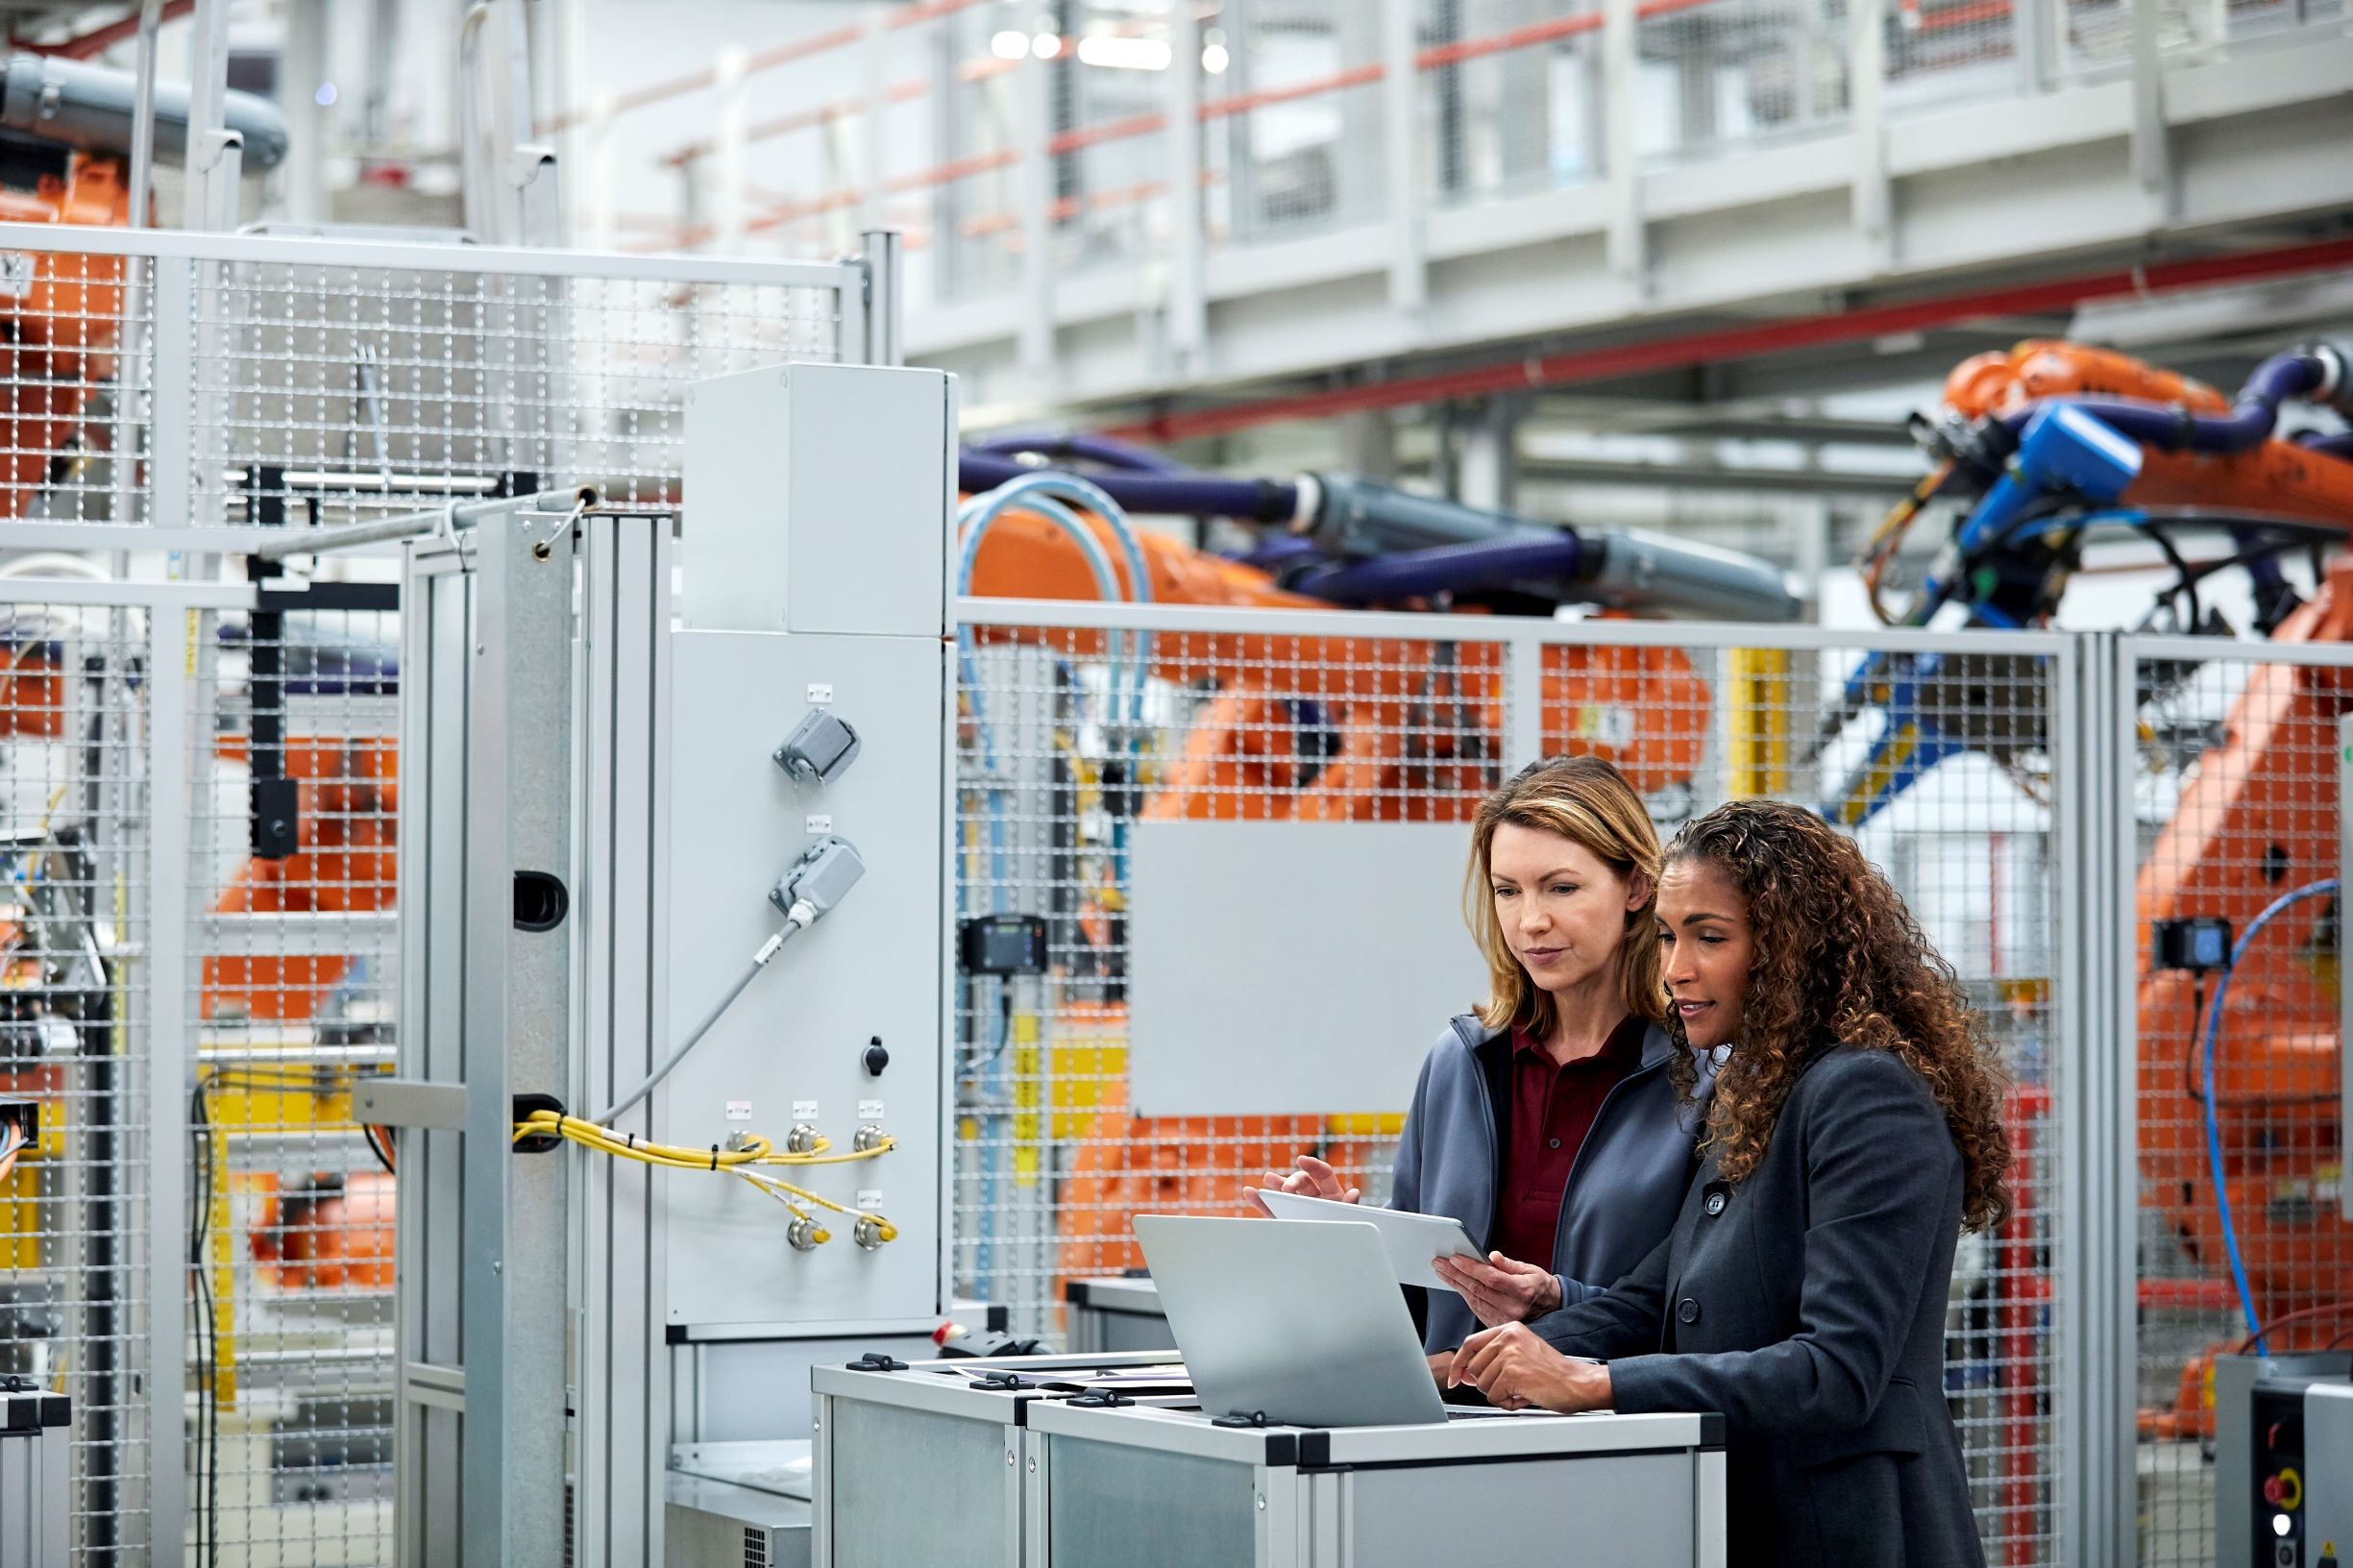 Management capabilities for the transition to Industry 4.0: an advanced manufacturing SME case study